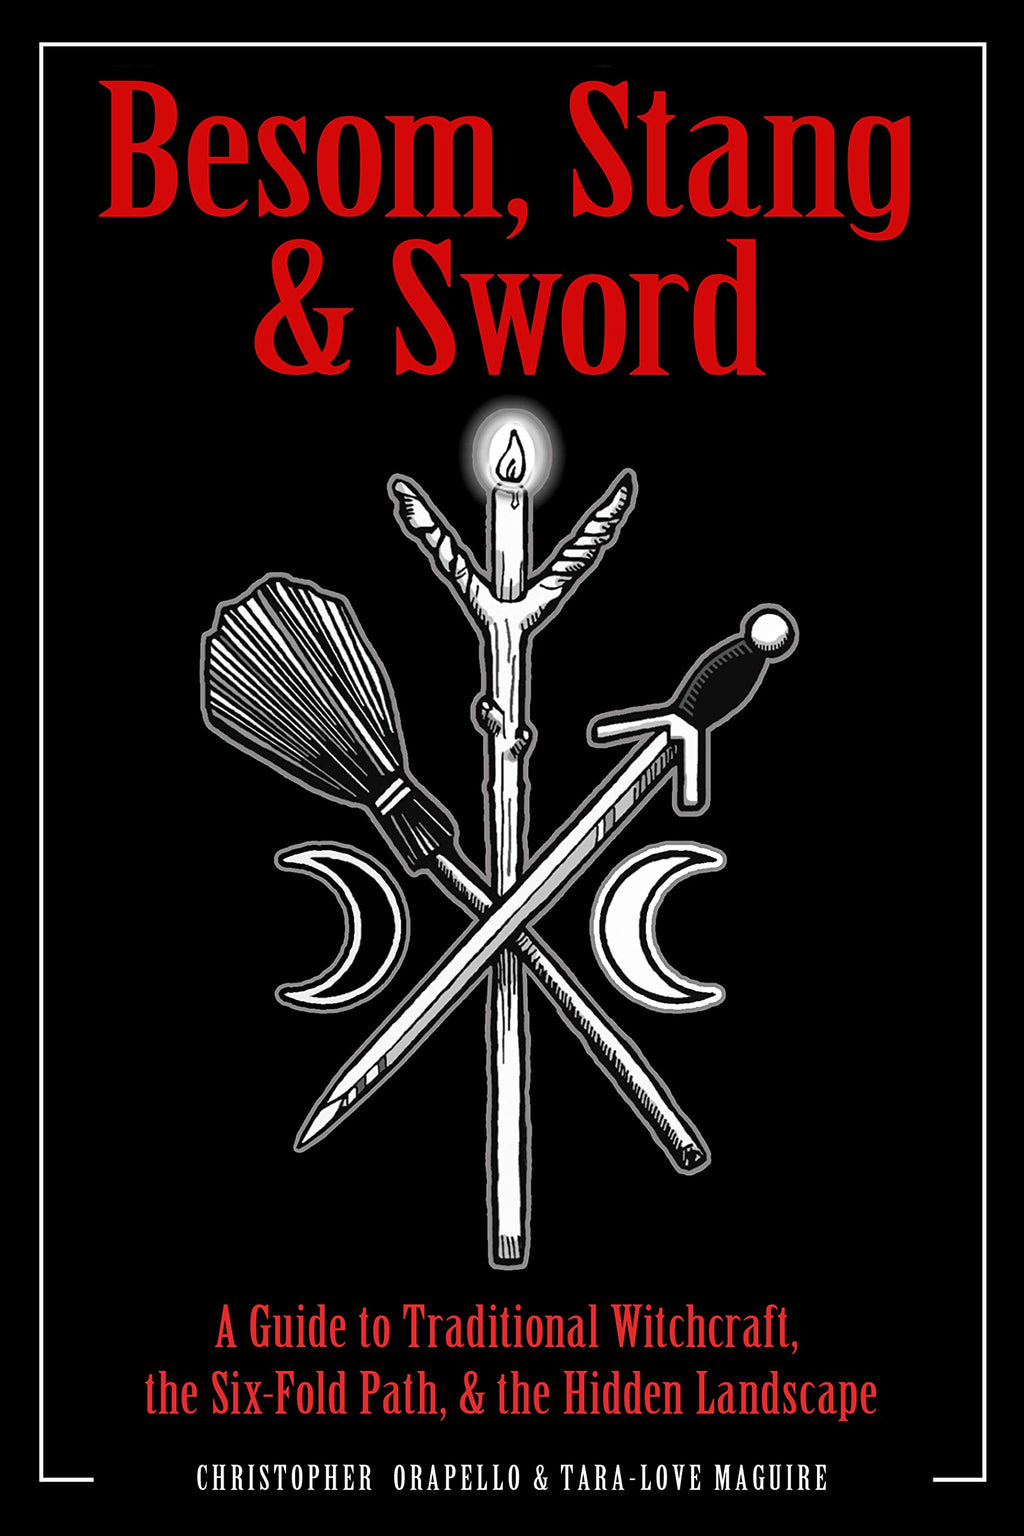 Besom, Stang & Sword by Christopher Orapello & Tara-Love Maguire